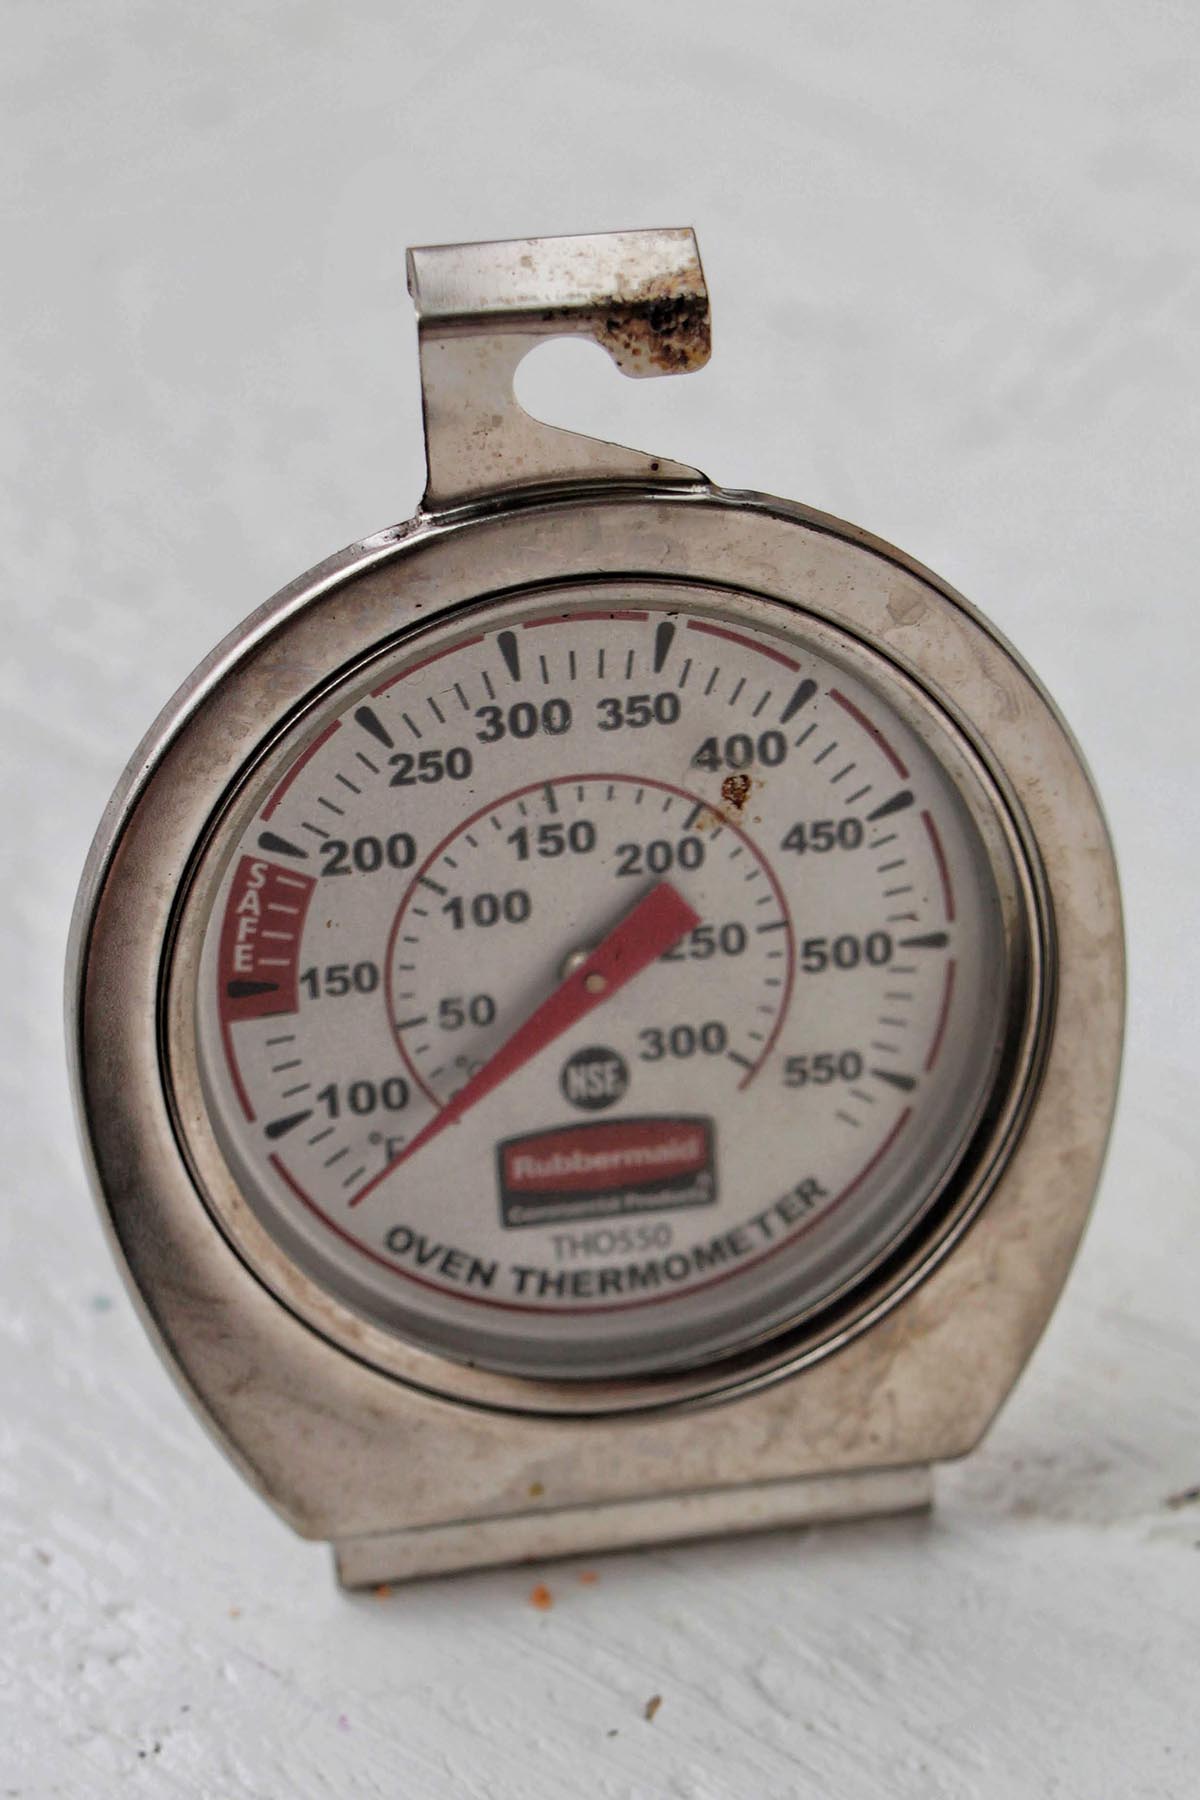 oven thermometer.